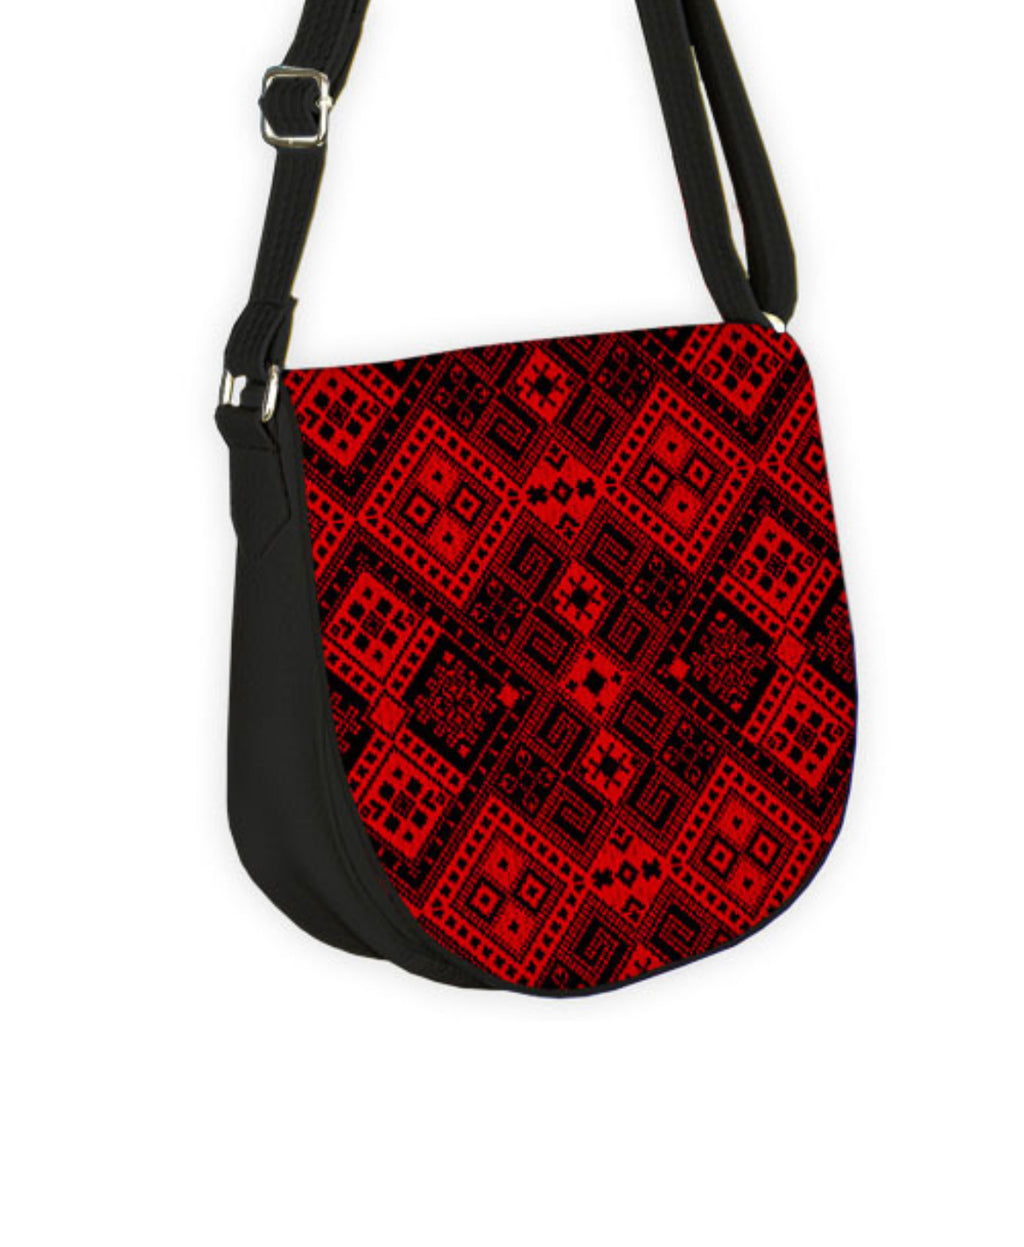 Cross Body Purse “Red and Black”